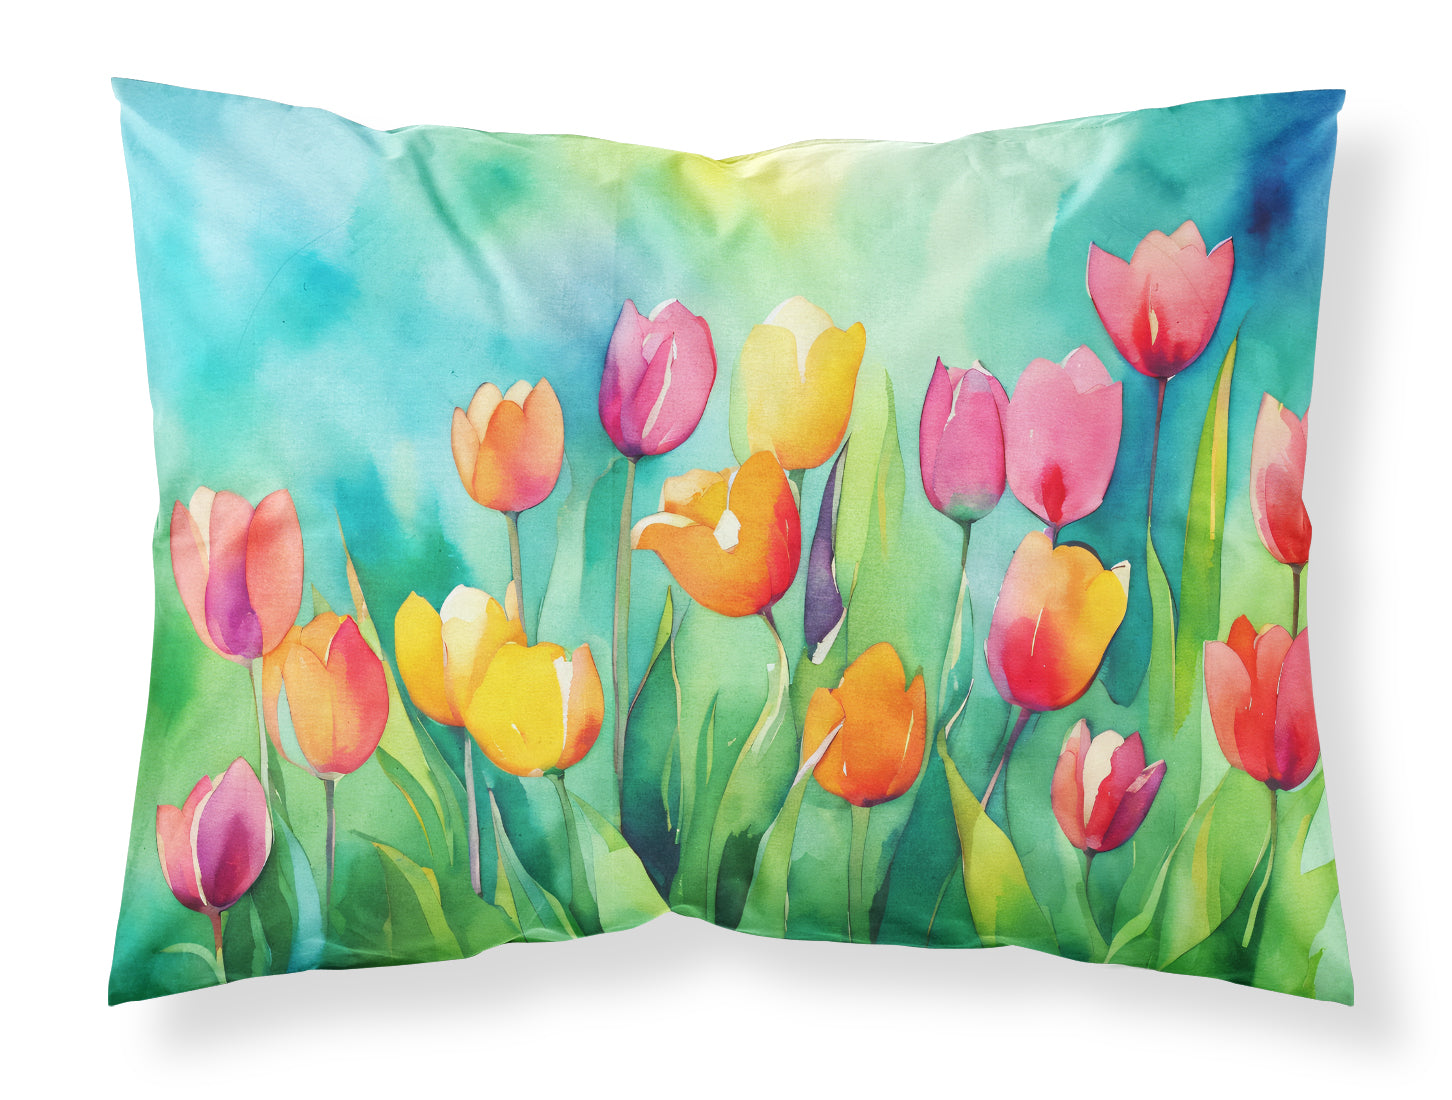 Buy this Tulips in Watercolor Fabric Standard Pillowcase